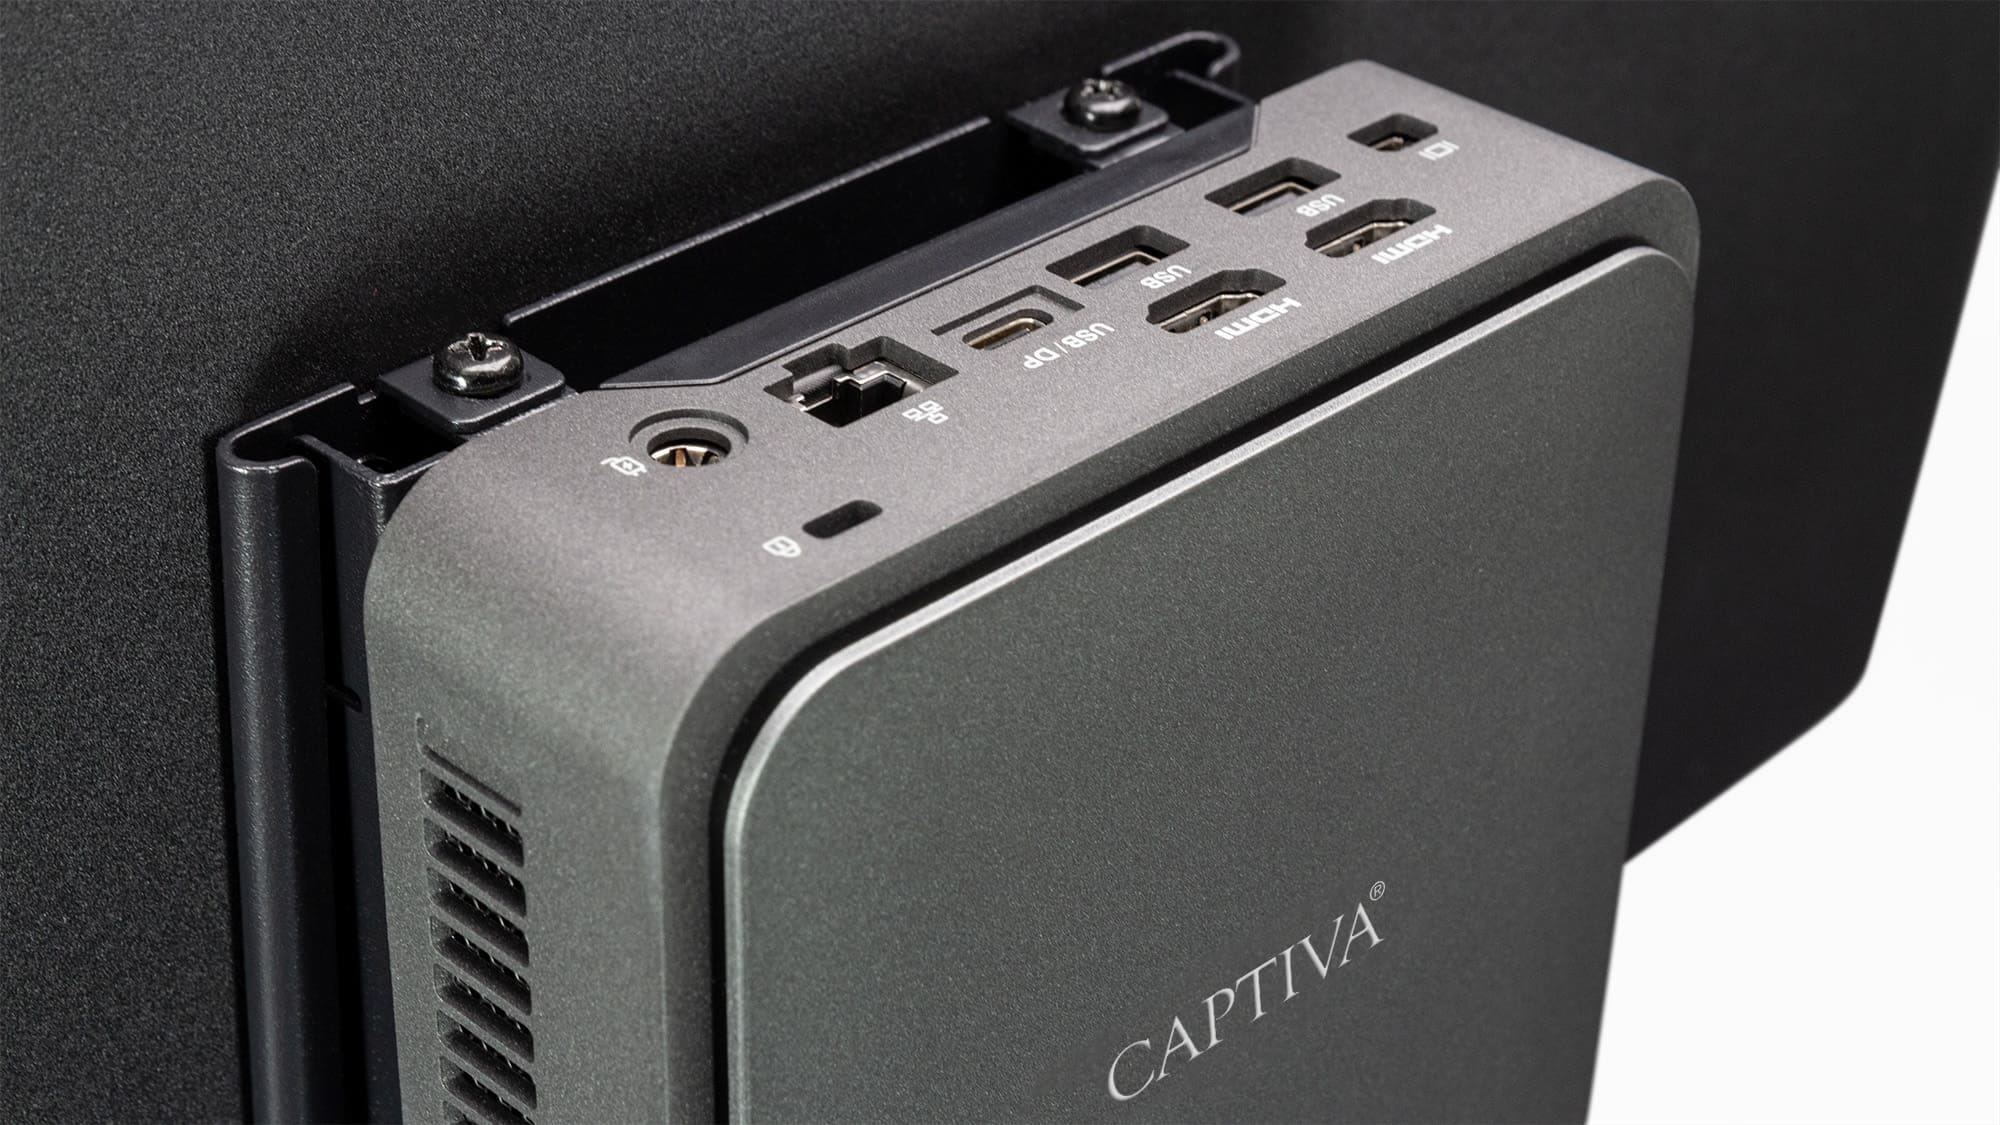 CAPTIVA All-in-One PC »All-In-One Power Starter I82-275«